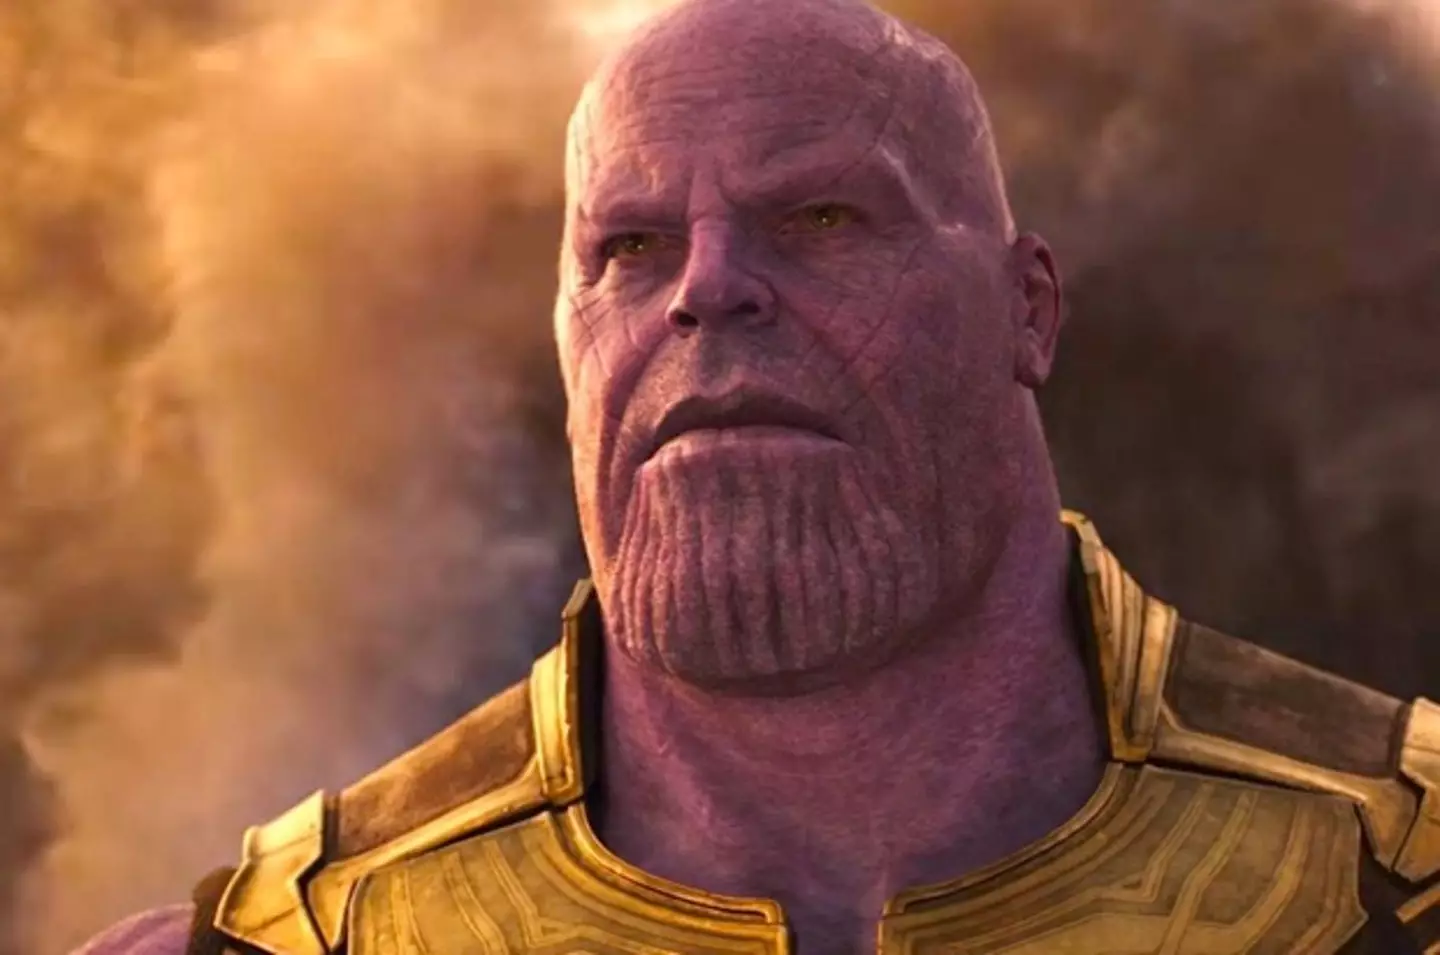 One baby was named Thanos last year.